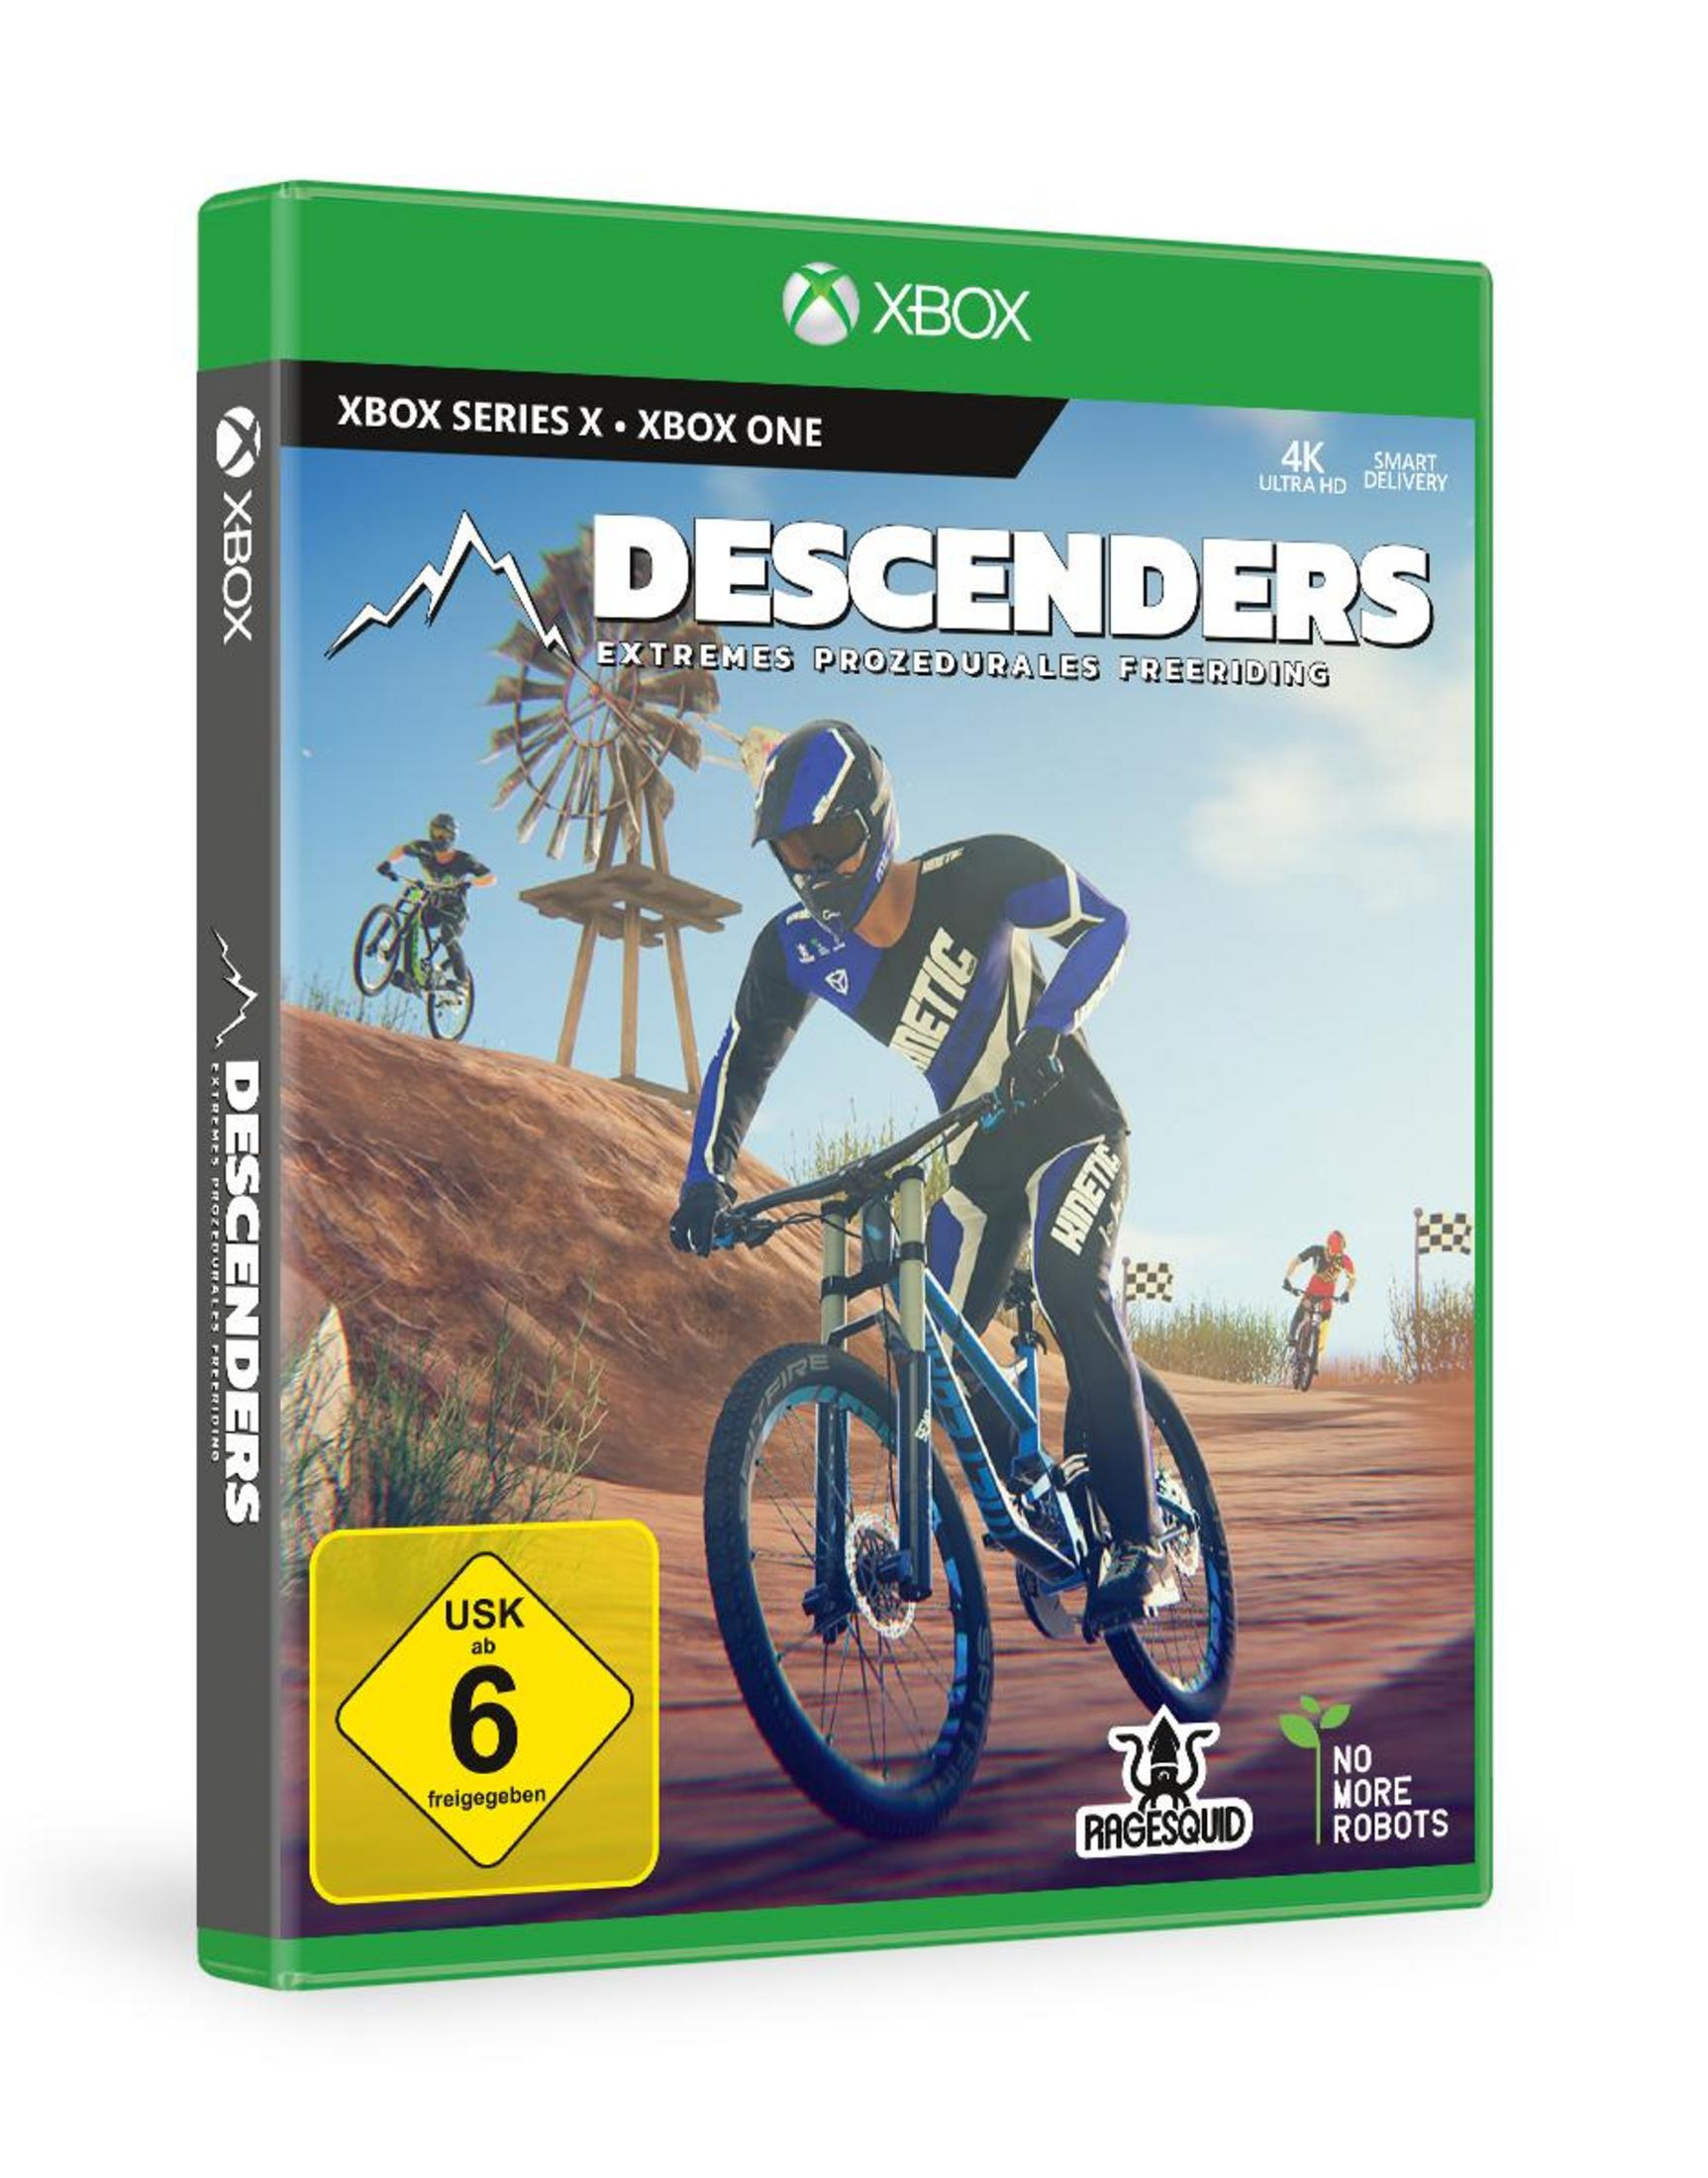 One] Descenders XBSX [Xbox -